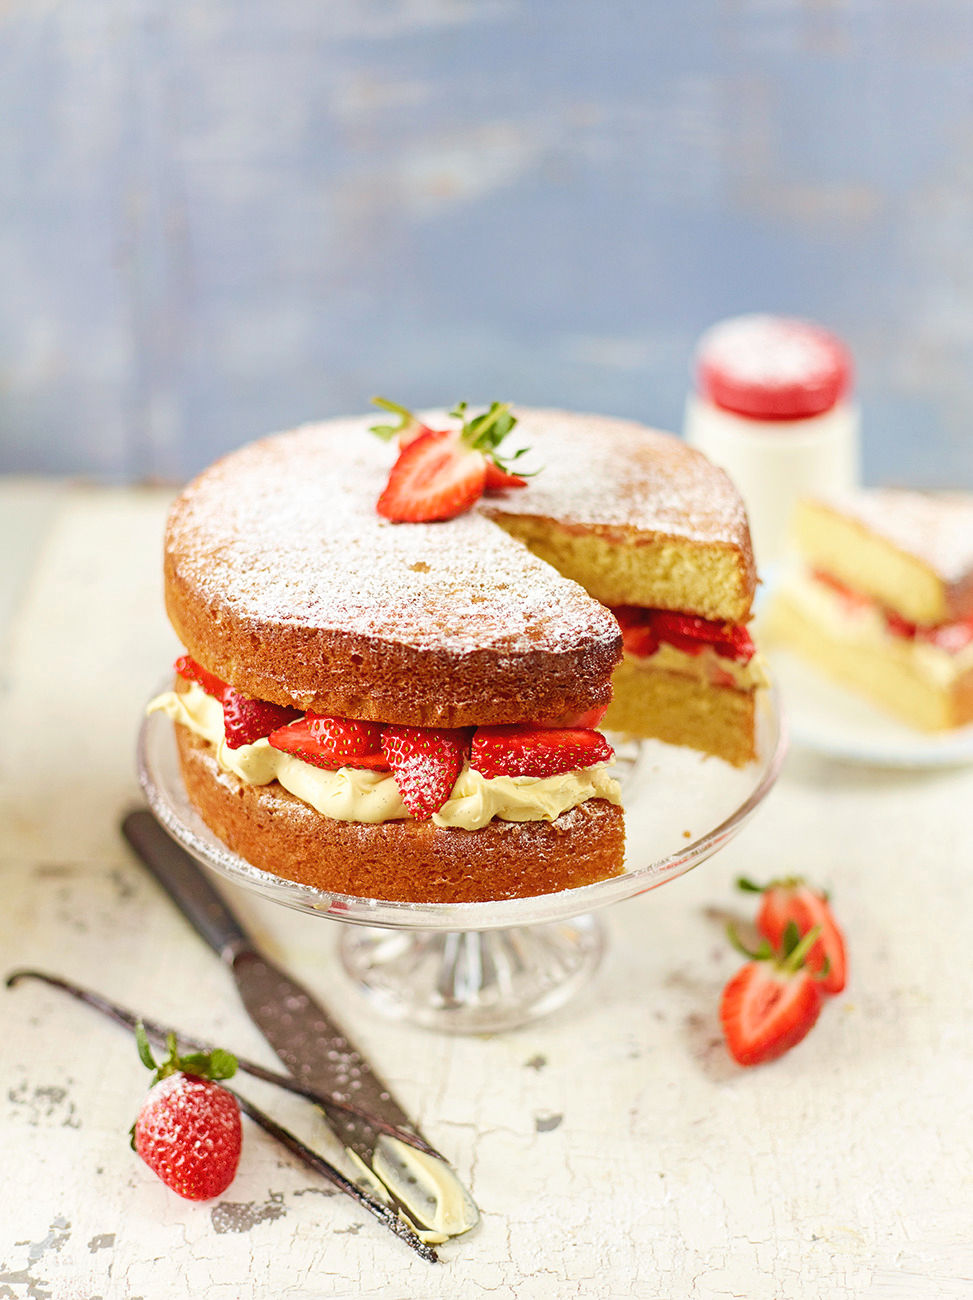 Strawberry Cake - no artificial colour or flavour added!